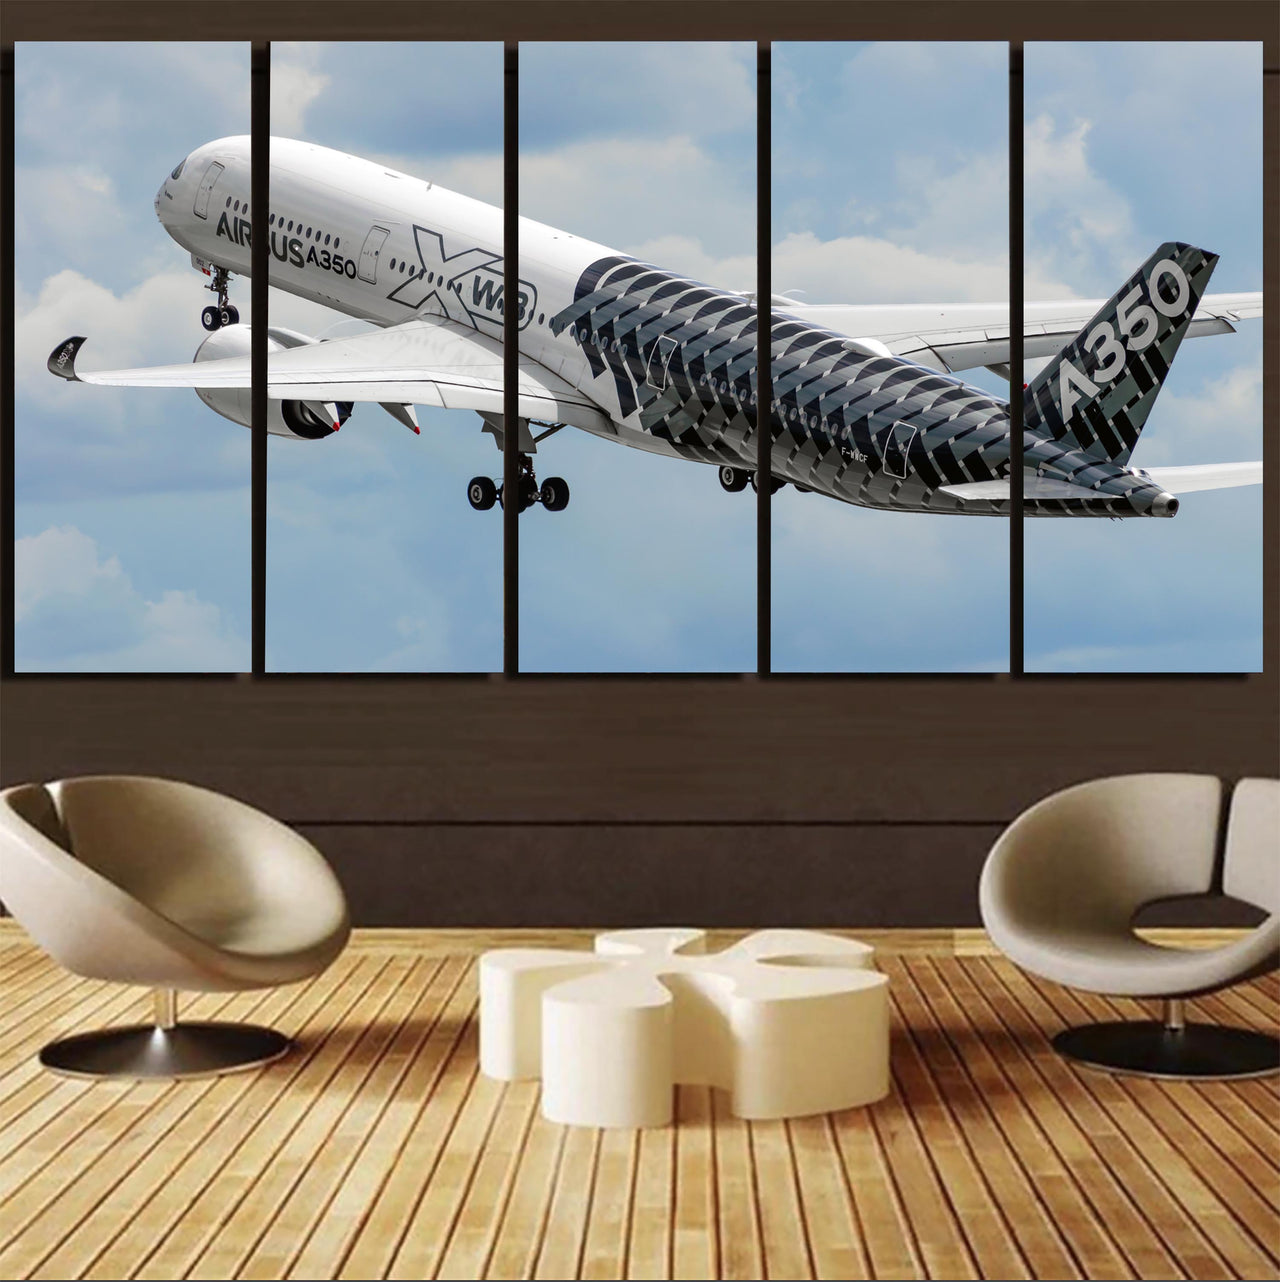 Departing Airbus A350 (Original Livery) Printed Canvas Prints (5 Pieces)